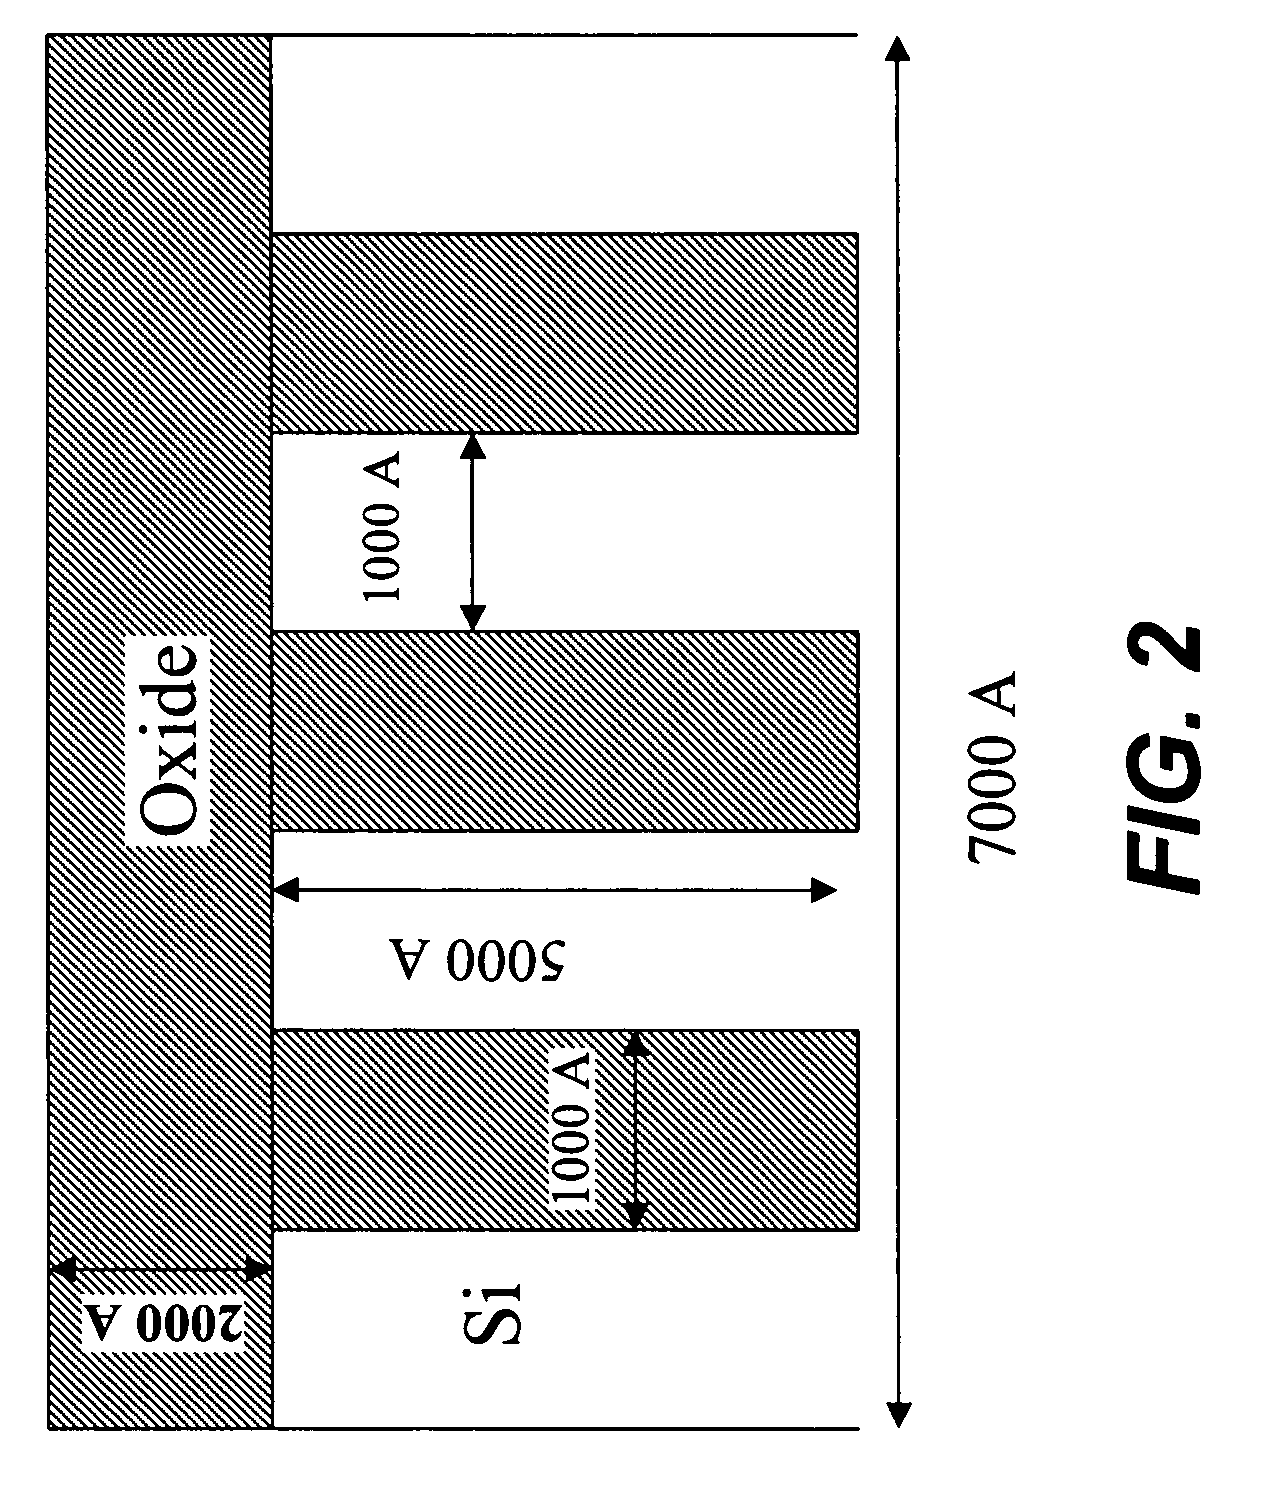 Localized energy pulse rapid thermal anneal dielectric film densification method